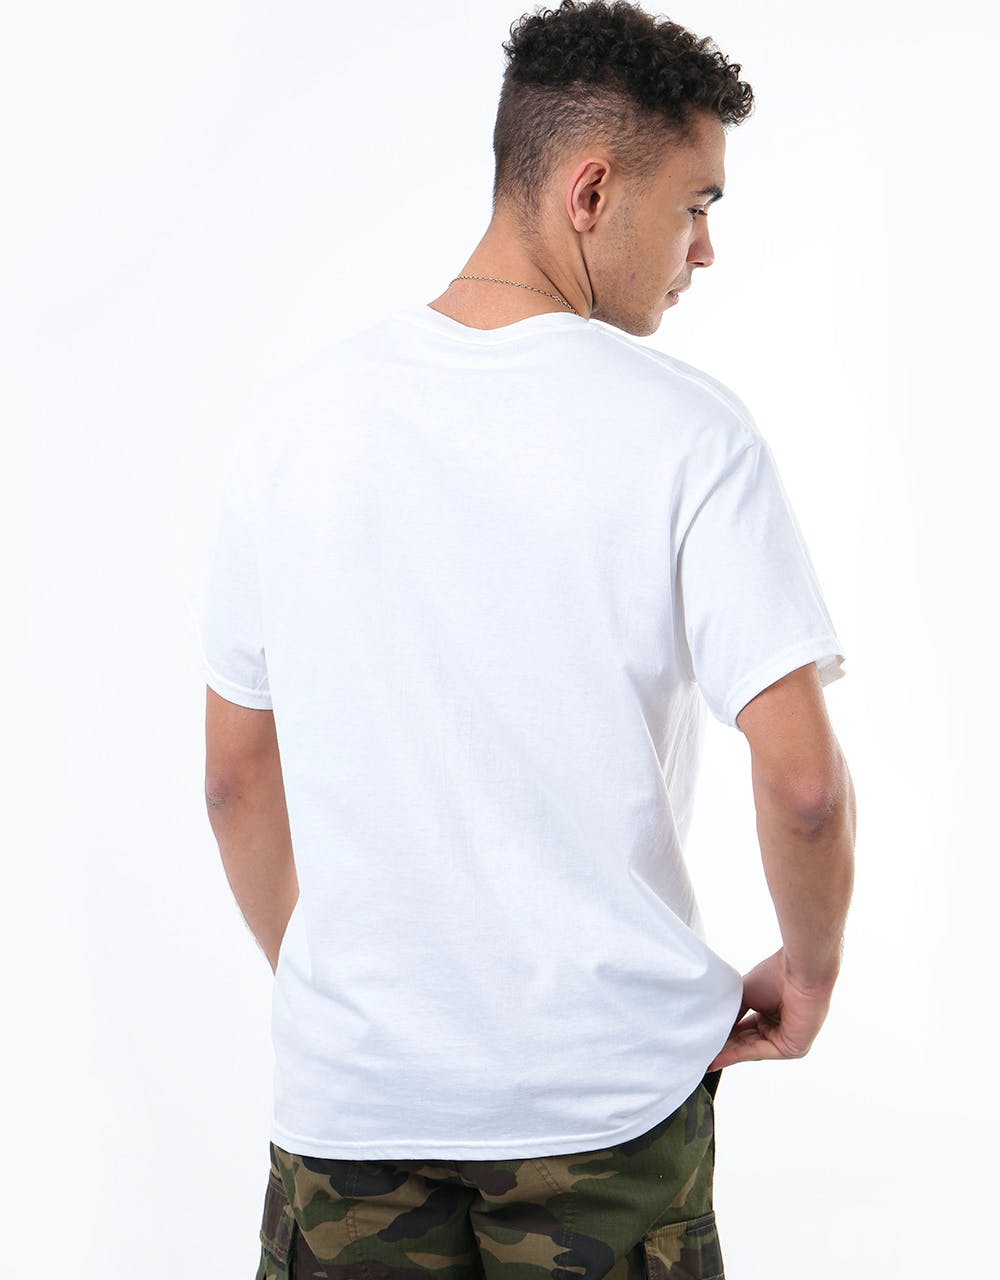 Route One Happiness T-Shirt - White